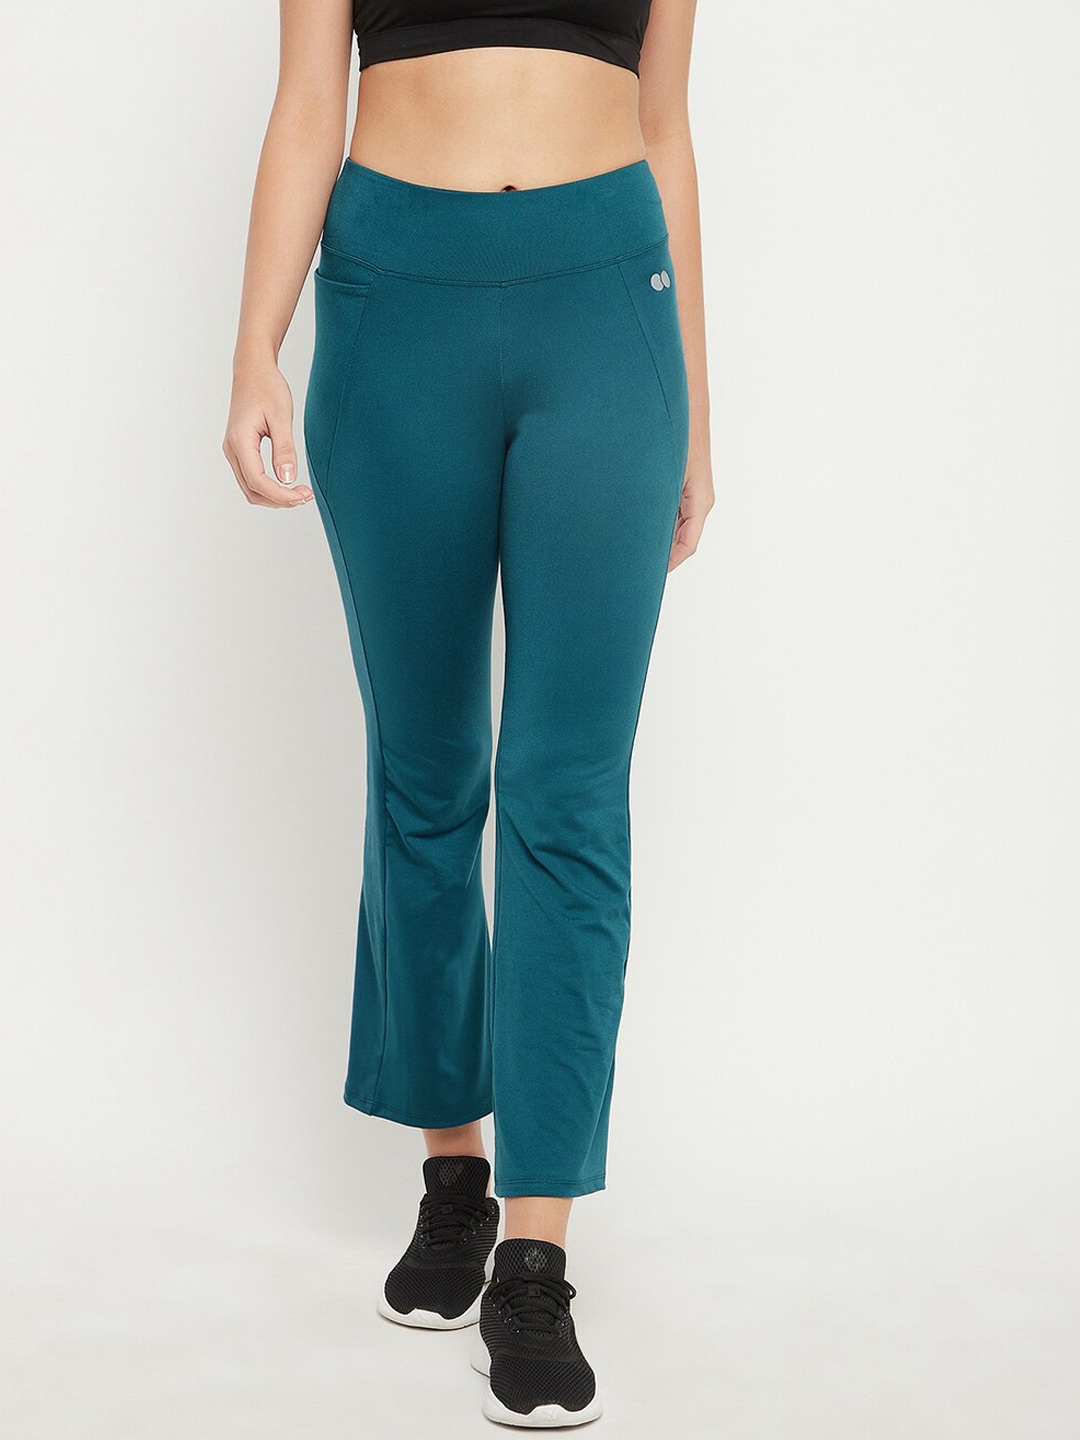 Clovia Women Teal Blue Solid Track Pants Price in India